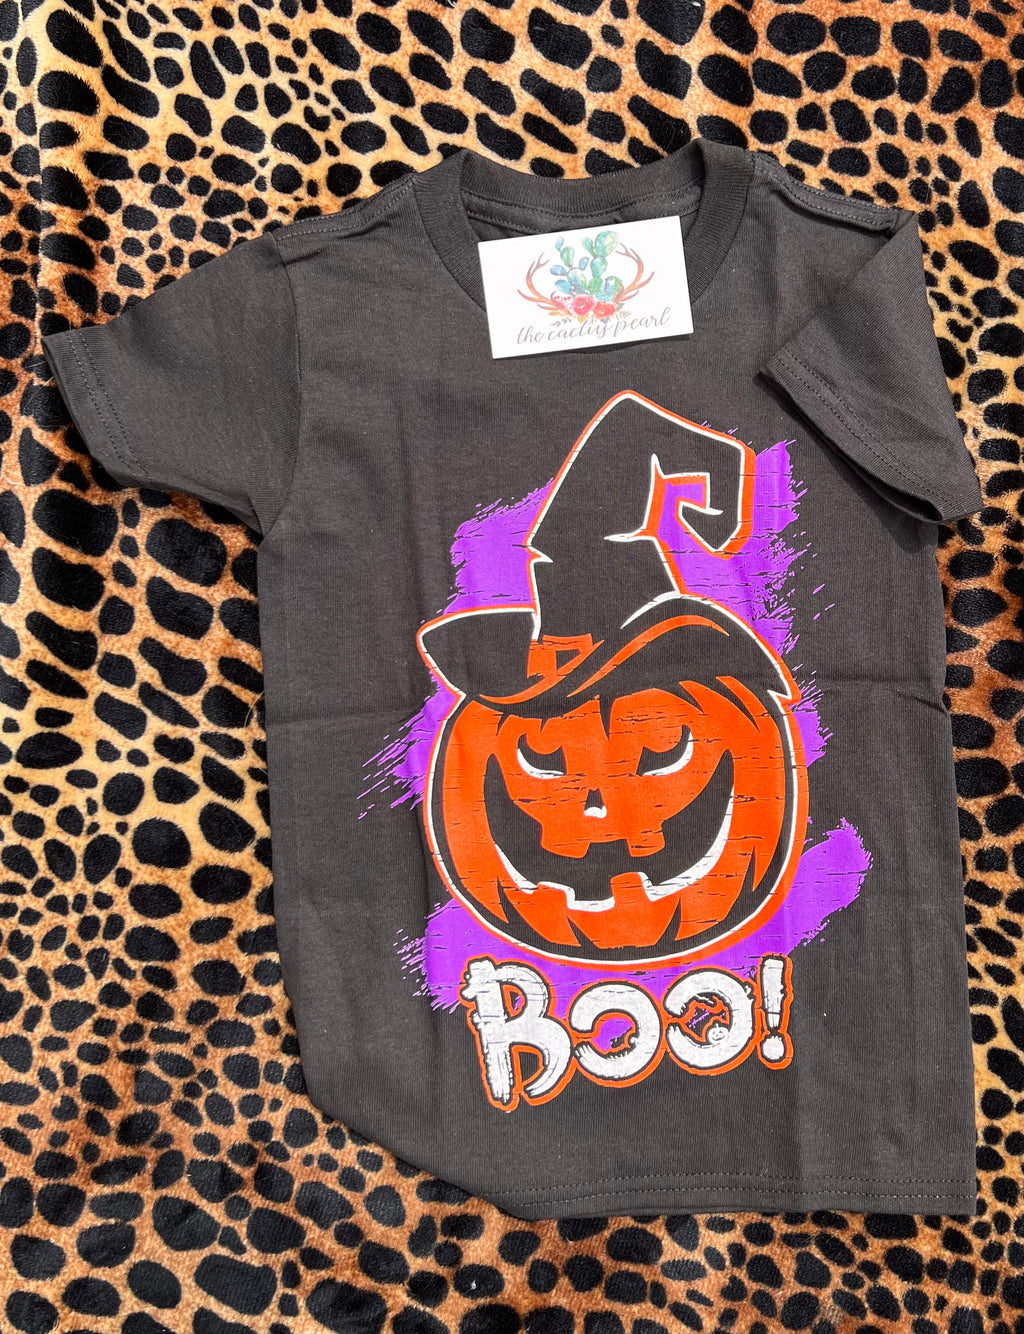 BOO! Youth Size